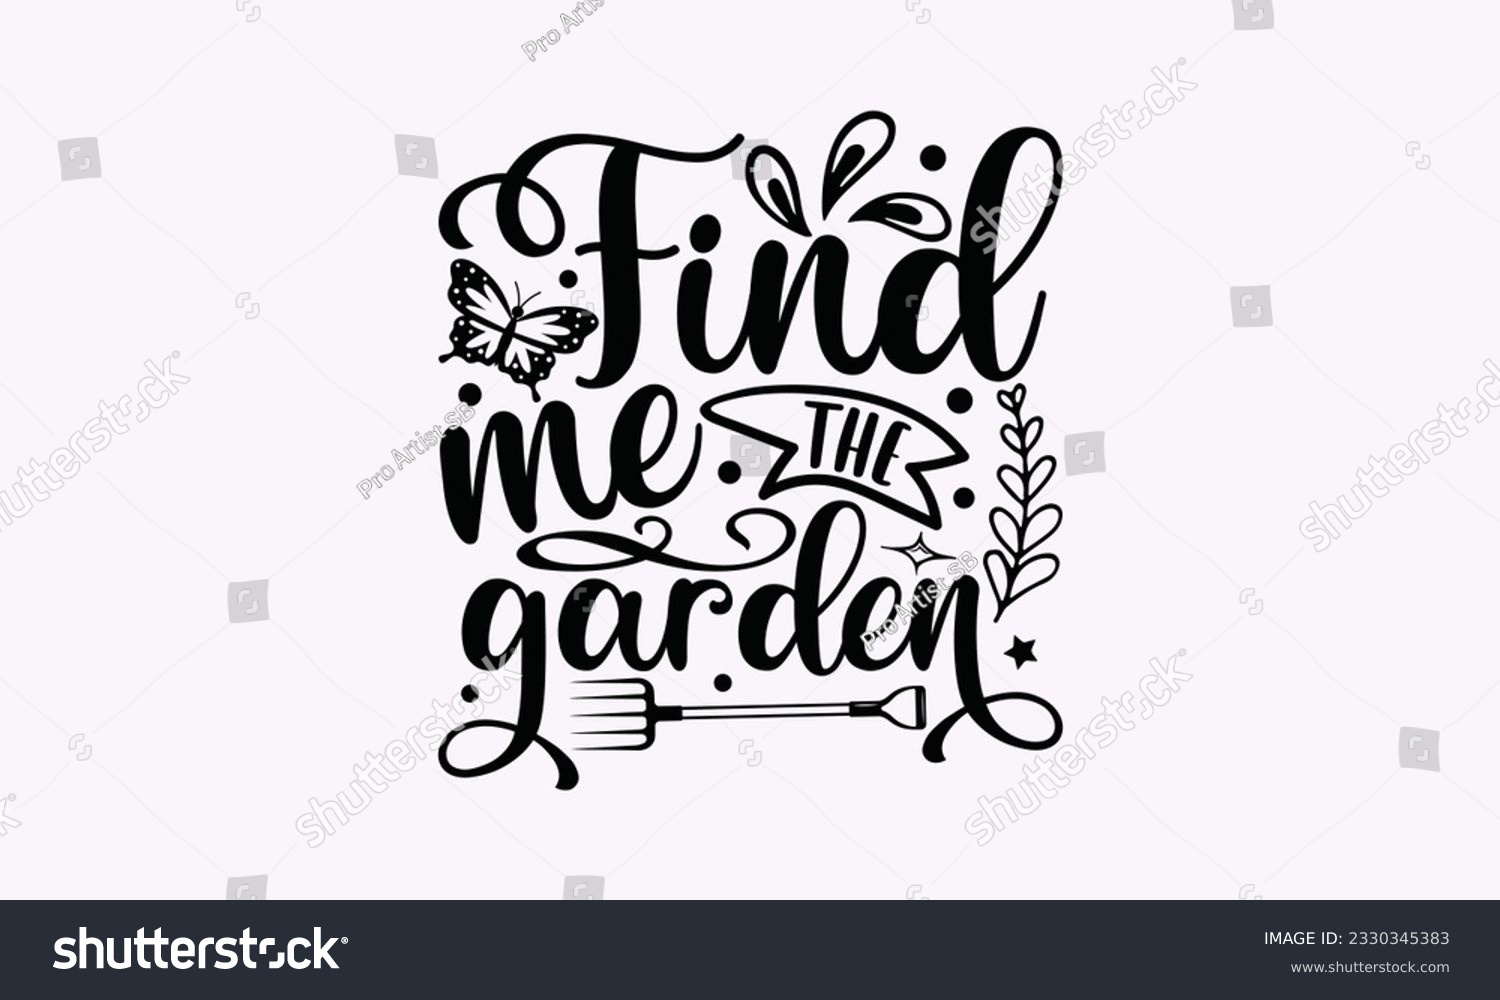 SVG of Find me the garden - Gardening SVG Design, Flower Quotes, Calligraphy graphic design, Typography poster with old style camera and quote. svg